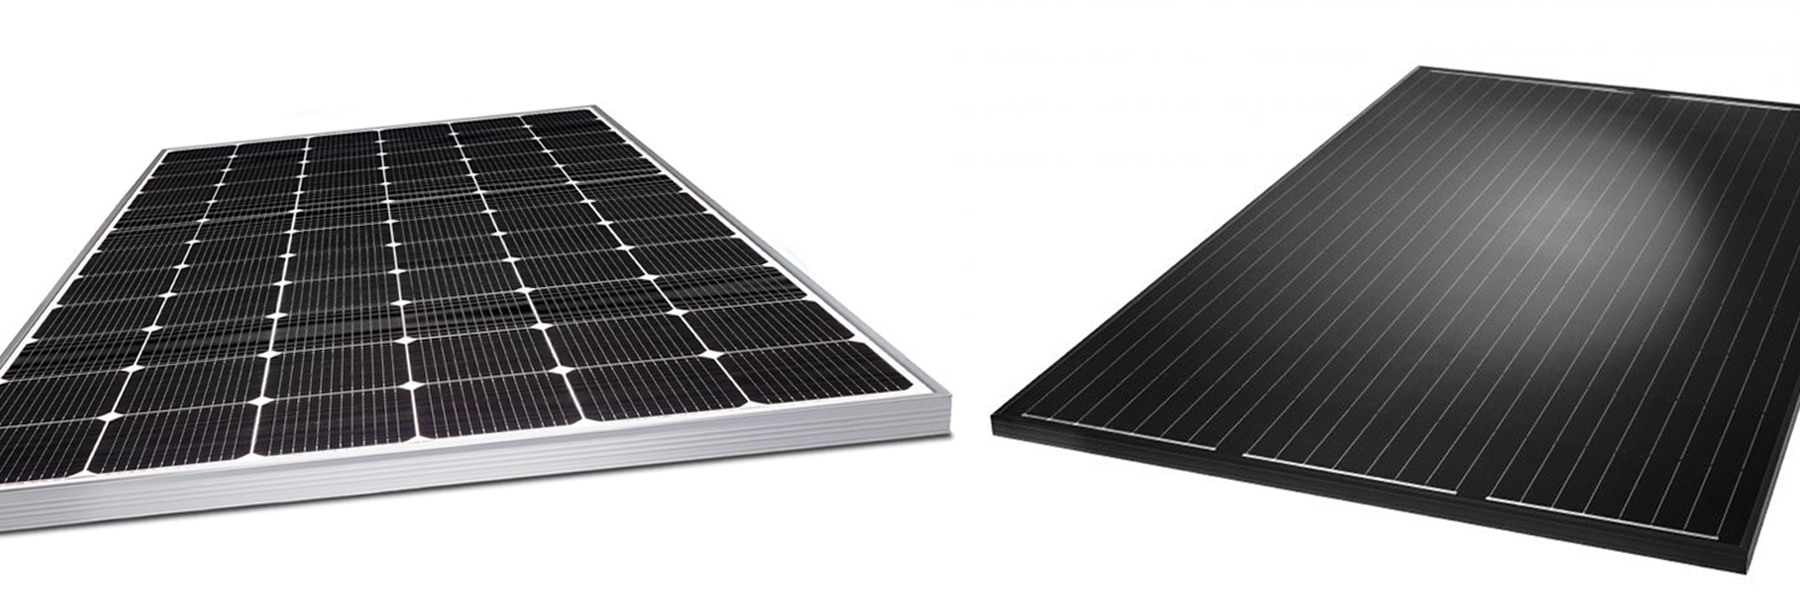 edmonton solar panels by lg and hanwha q cell - how efficient are solar panels